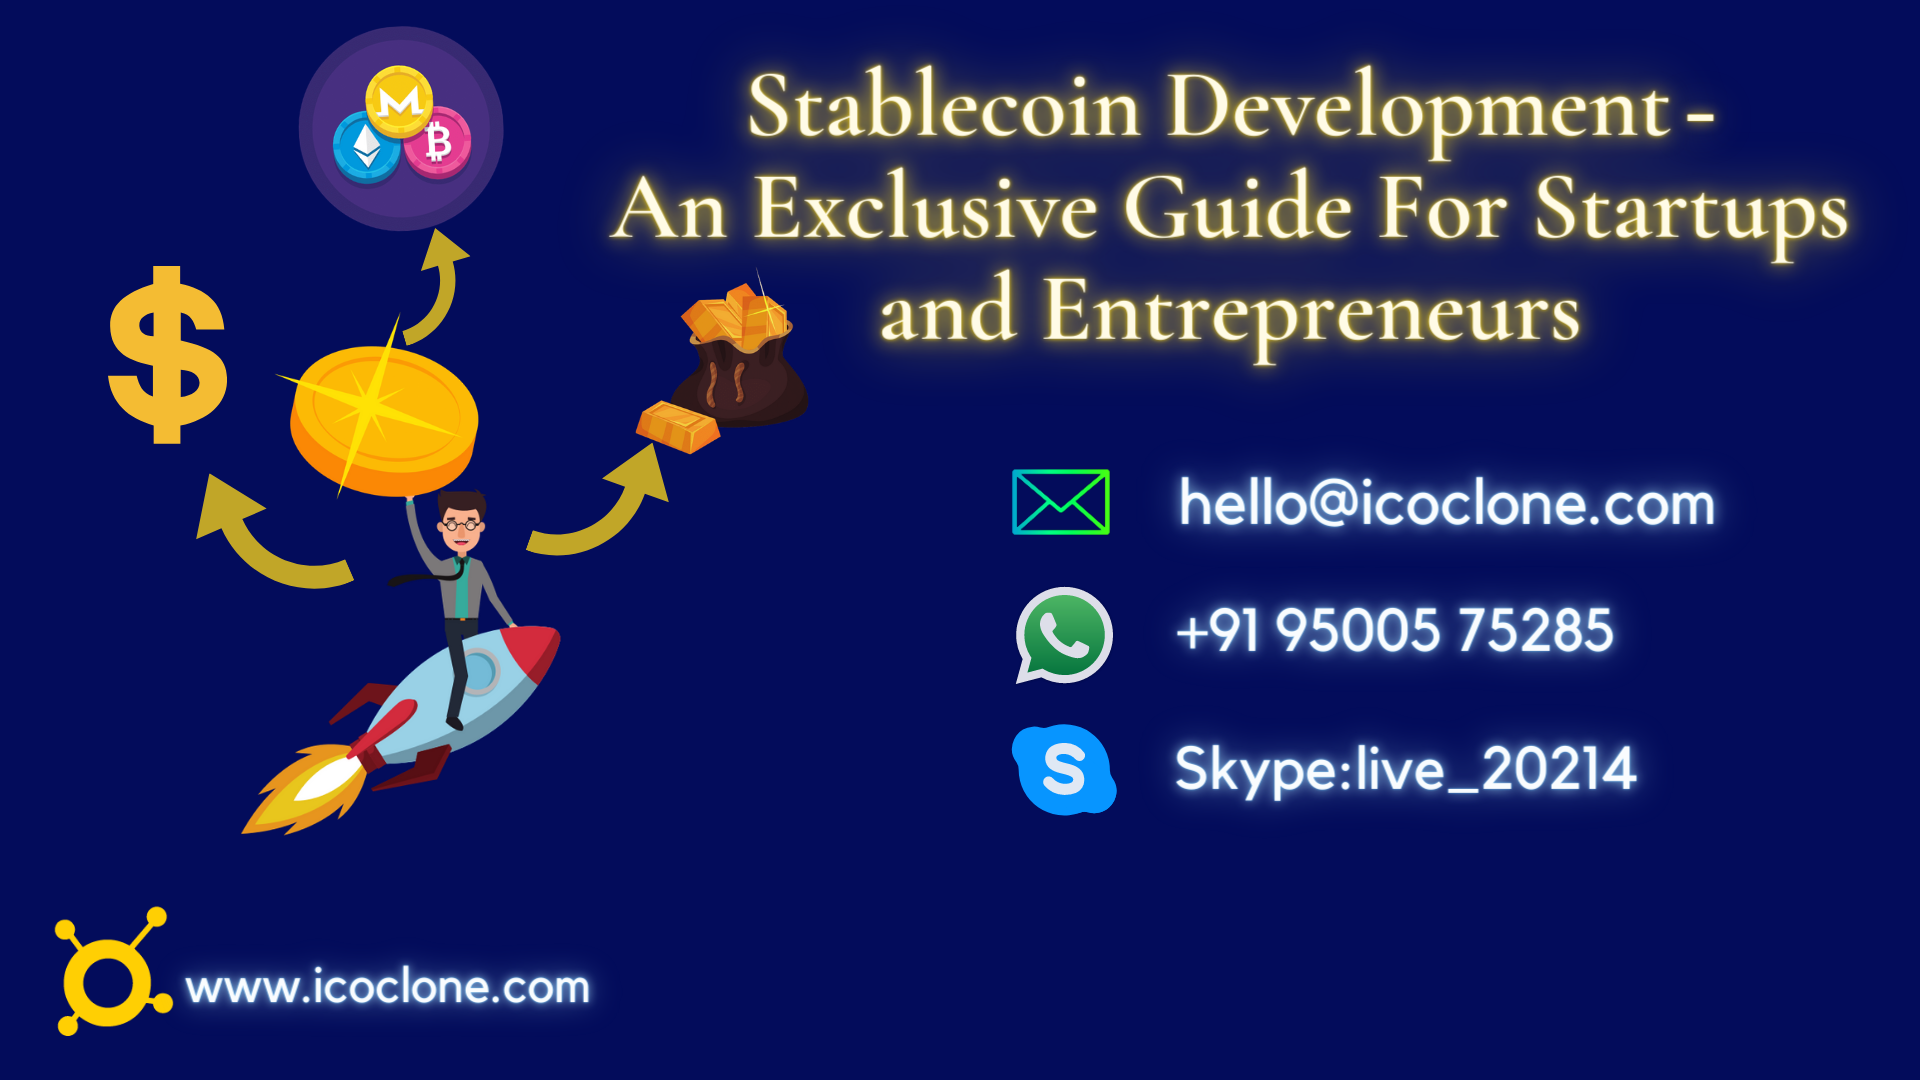 Stablecoin Development | How to Create your Own Stablecoin?